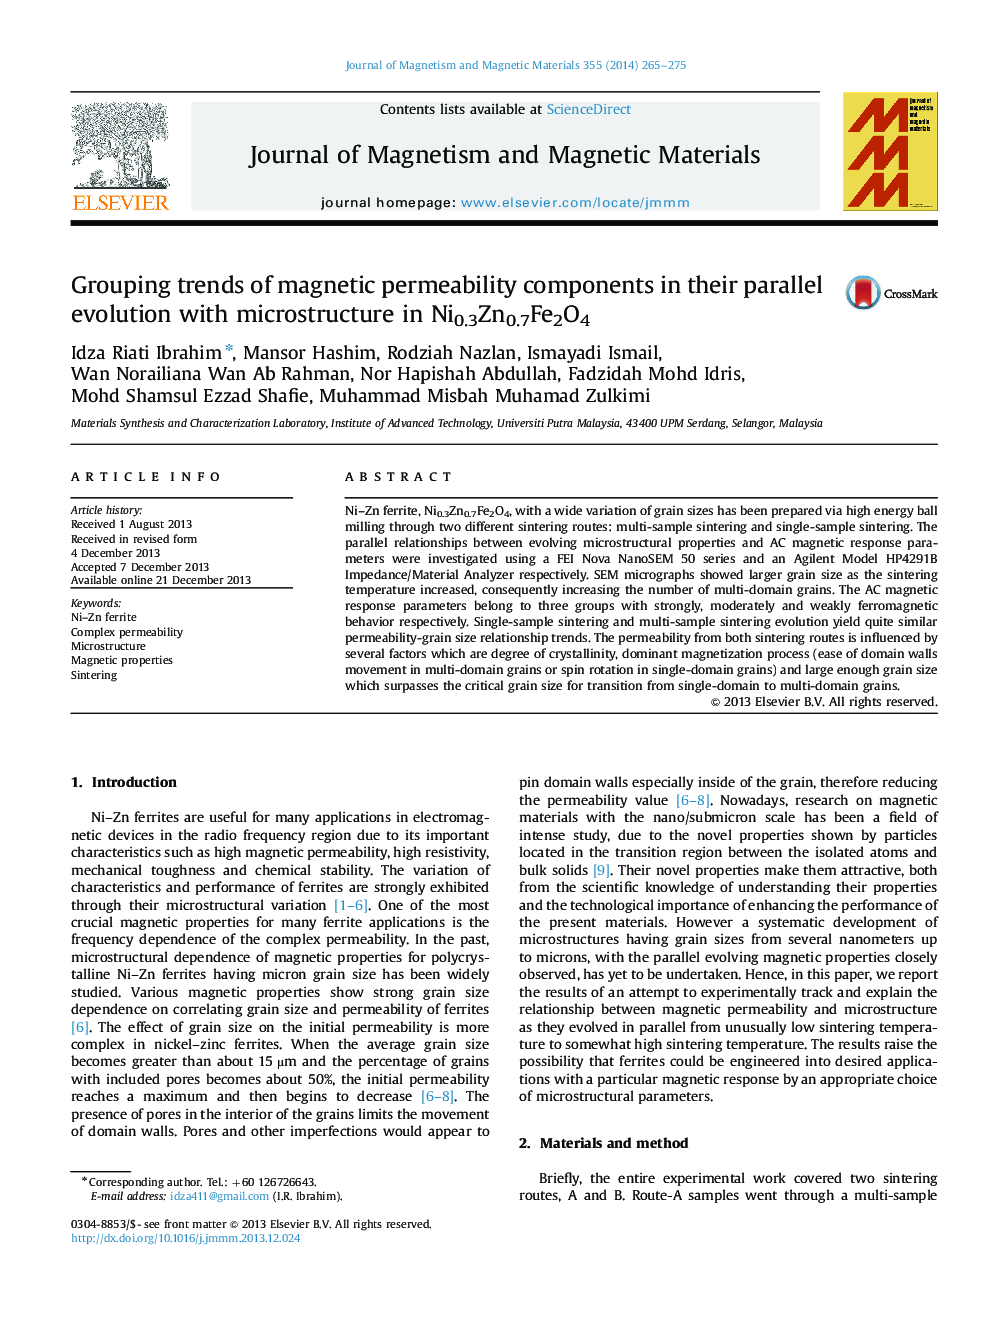 Grouping trends of magnetic permeability components in their parallel evolution with microstructure in Ni0.3Zn0.7Fe2O4